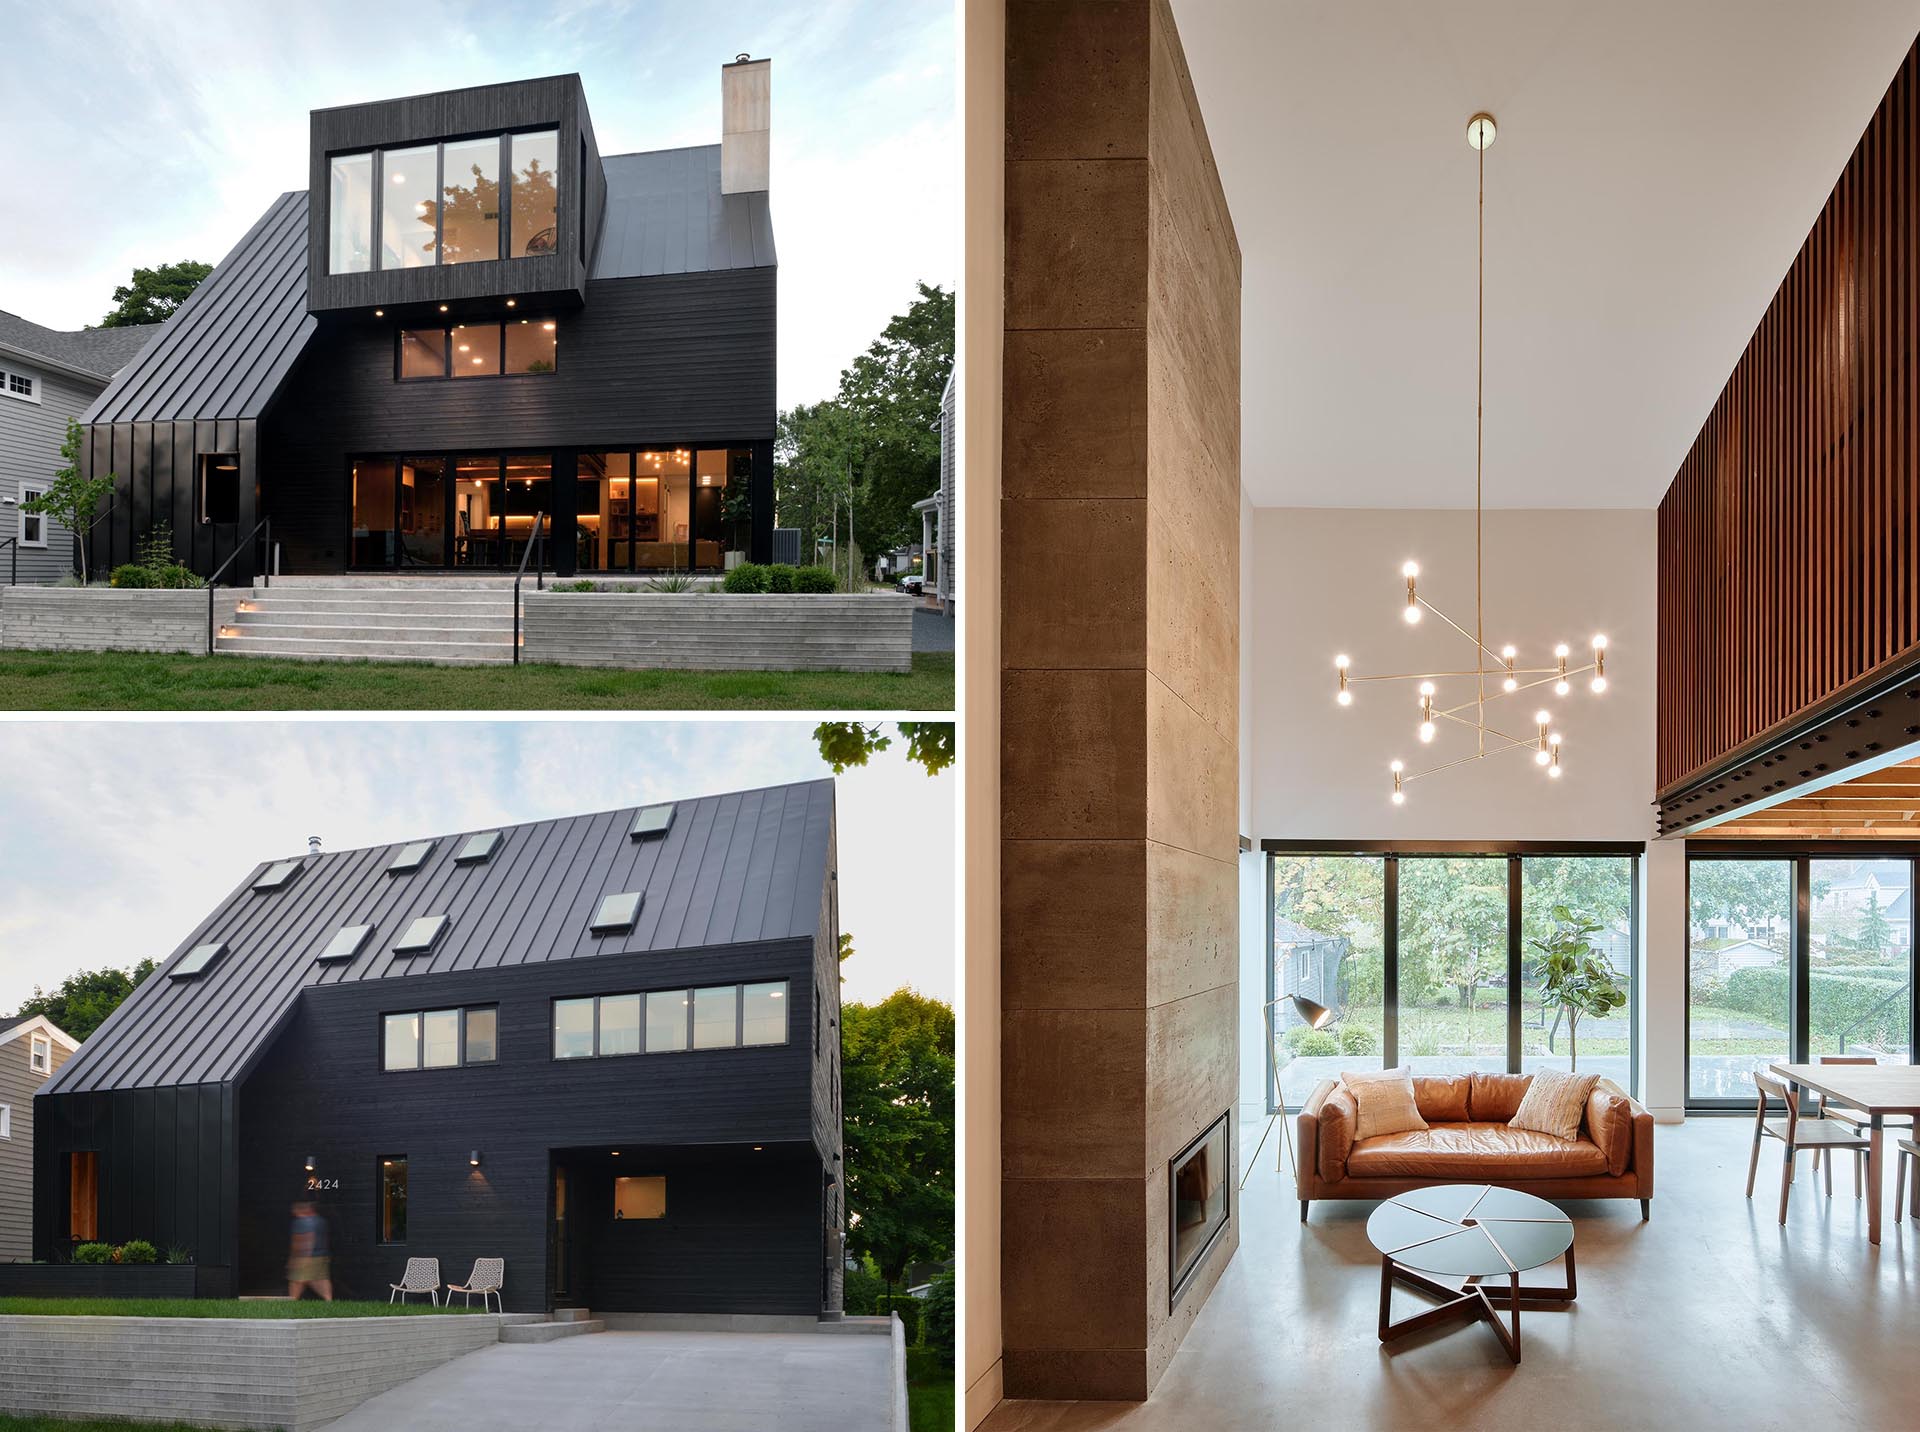 A modern black house with wood siding and a standing seam metal roof, as well as black window frames.